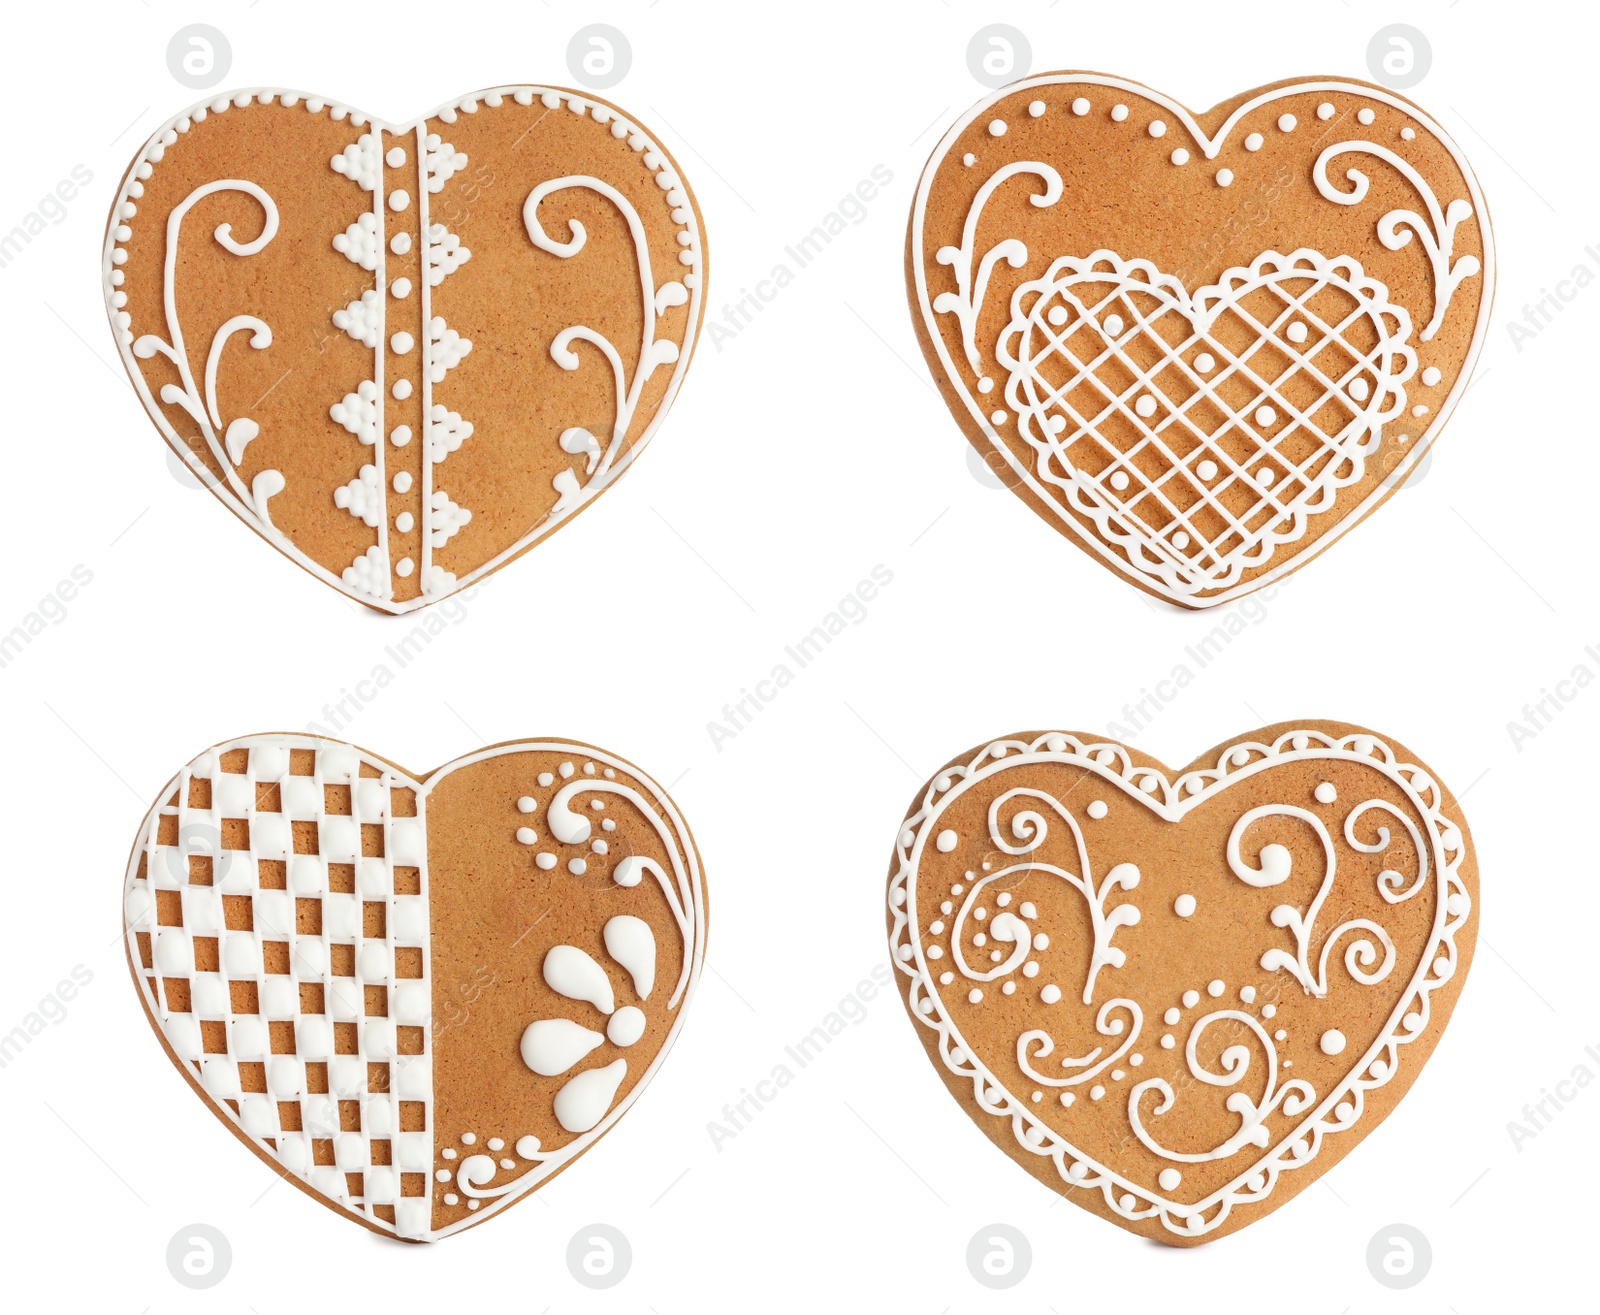 Image of Set of Christmas gingerbread heart shaped cookies on white background 